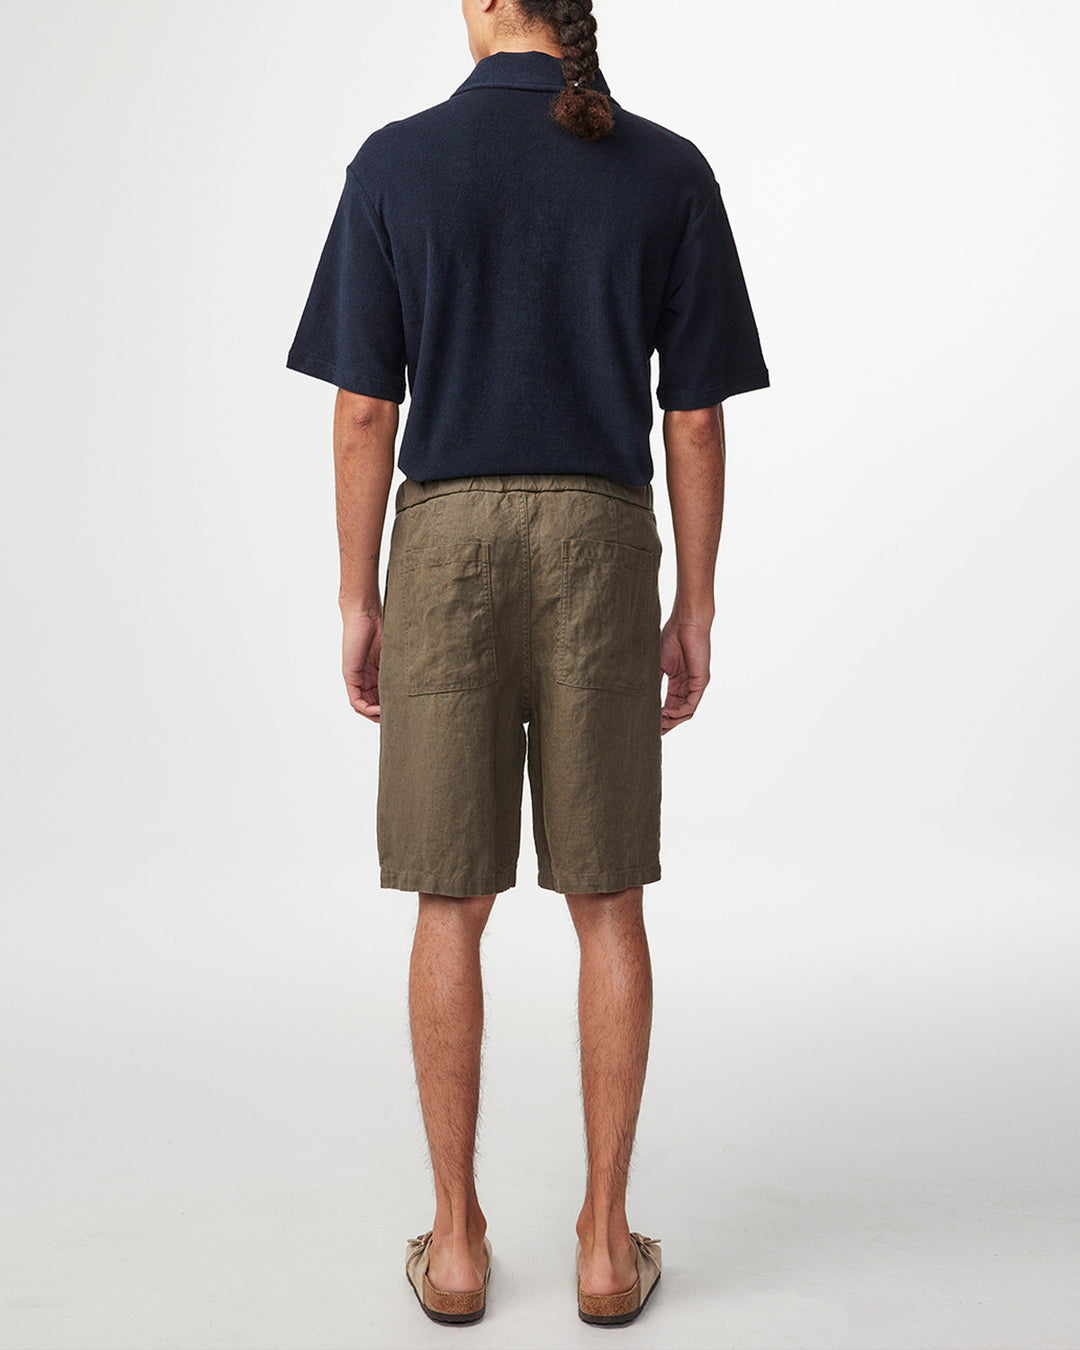 NN07 - Keith 1196 Shorts in Khaki Army | Buster McGee